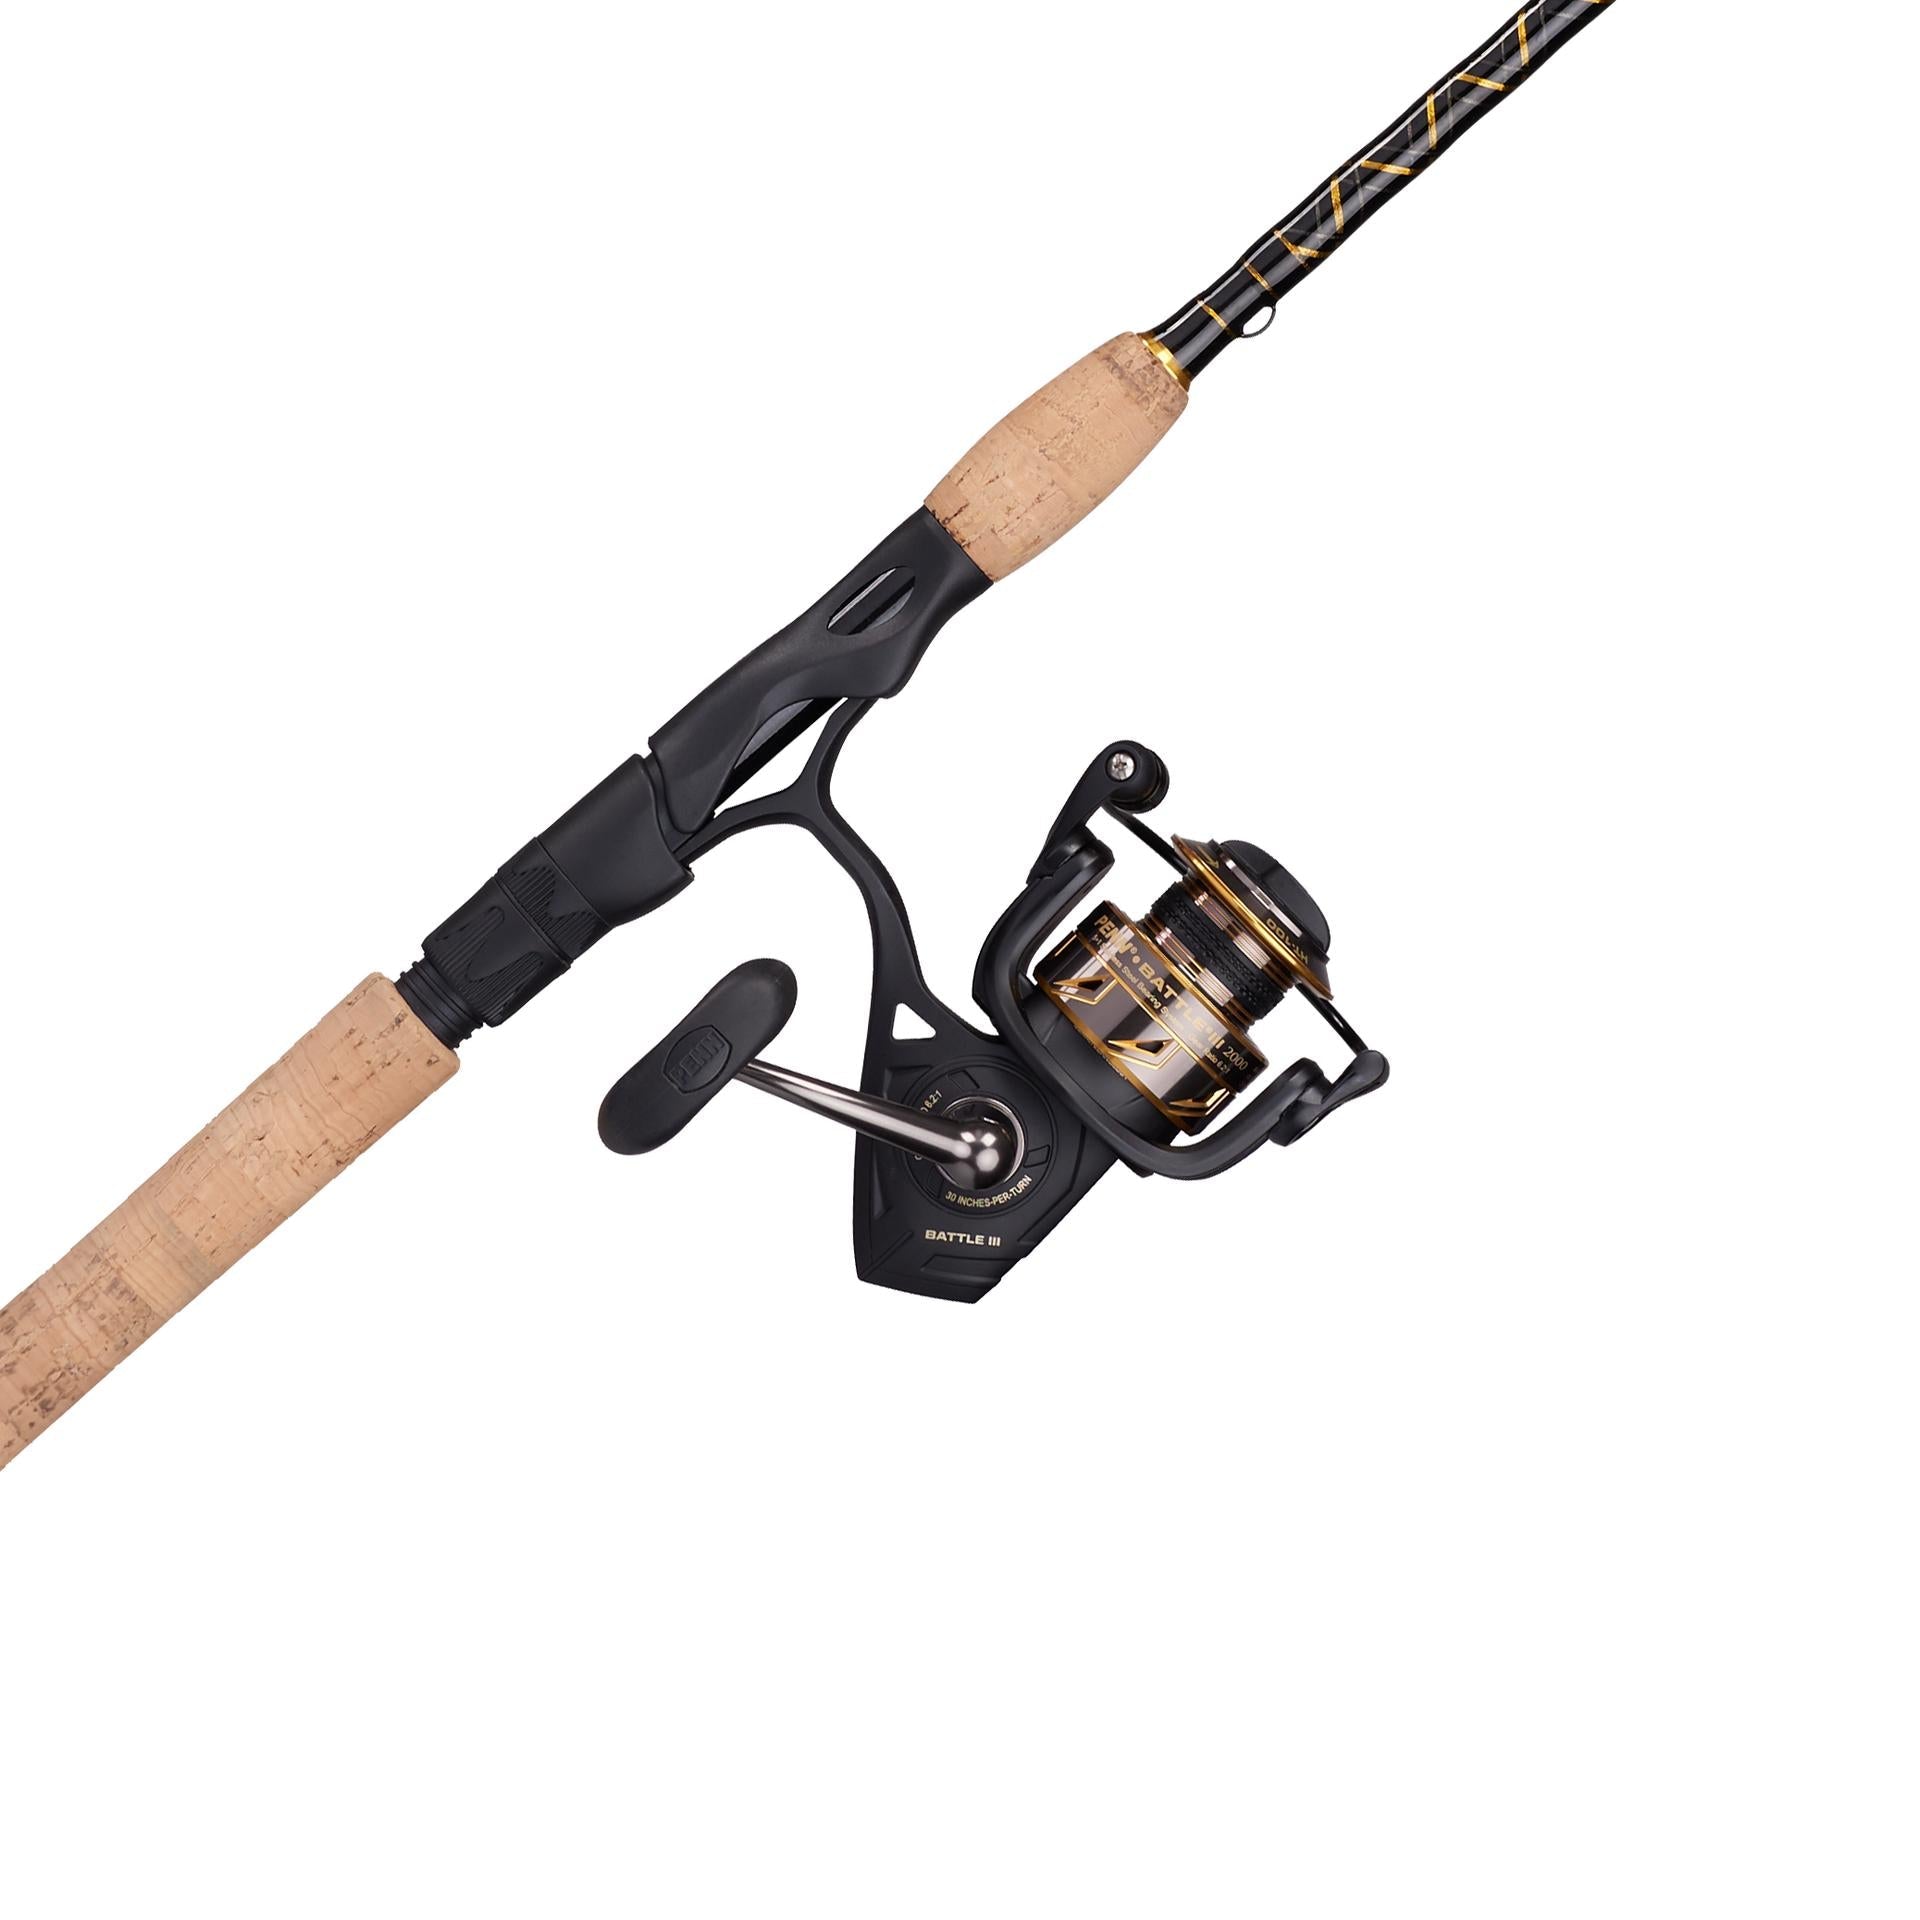 Fishing poles for sale 500 takes all - Classifieds - Buy, Sell